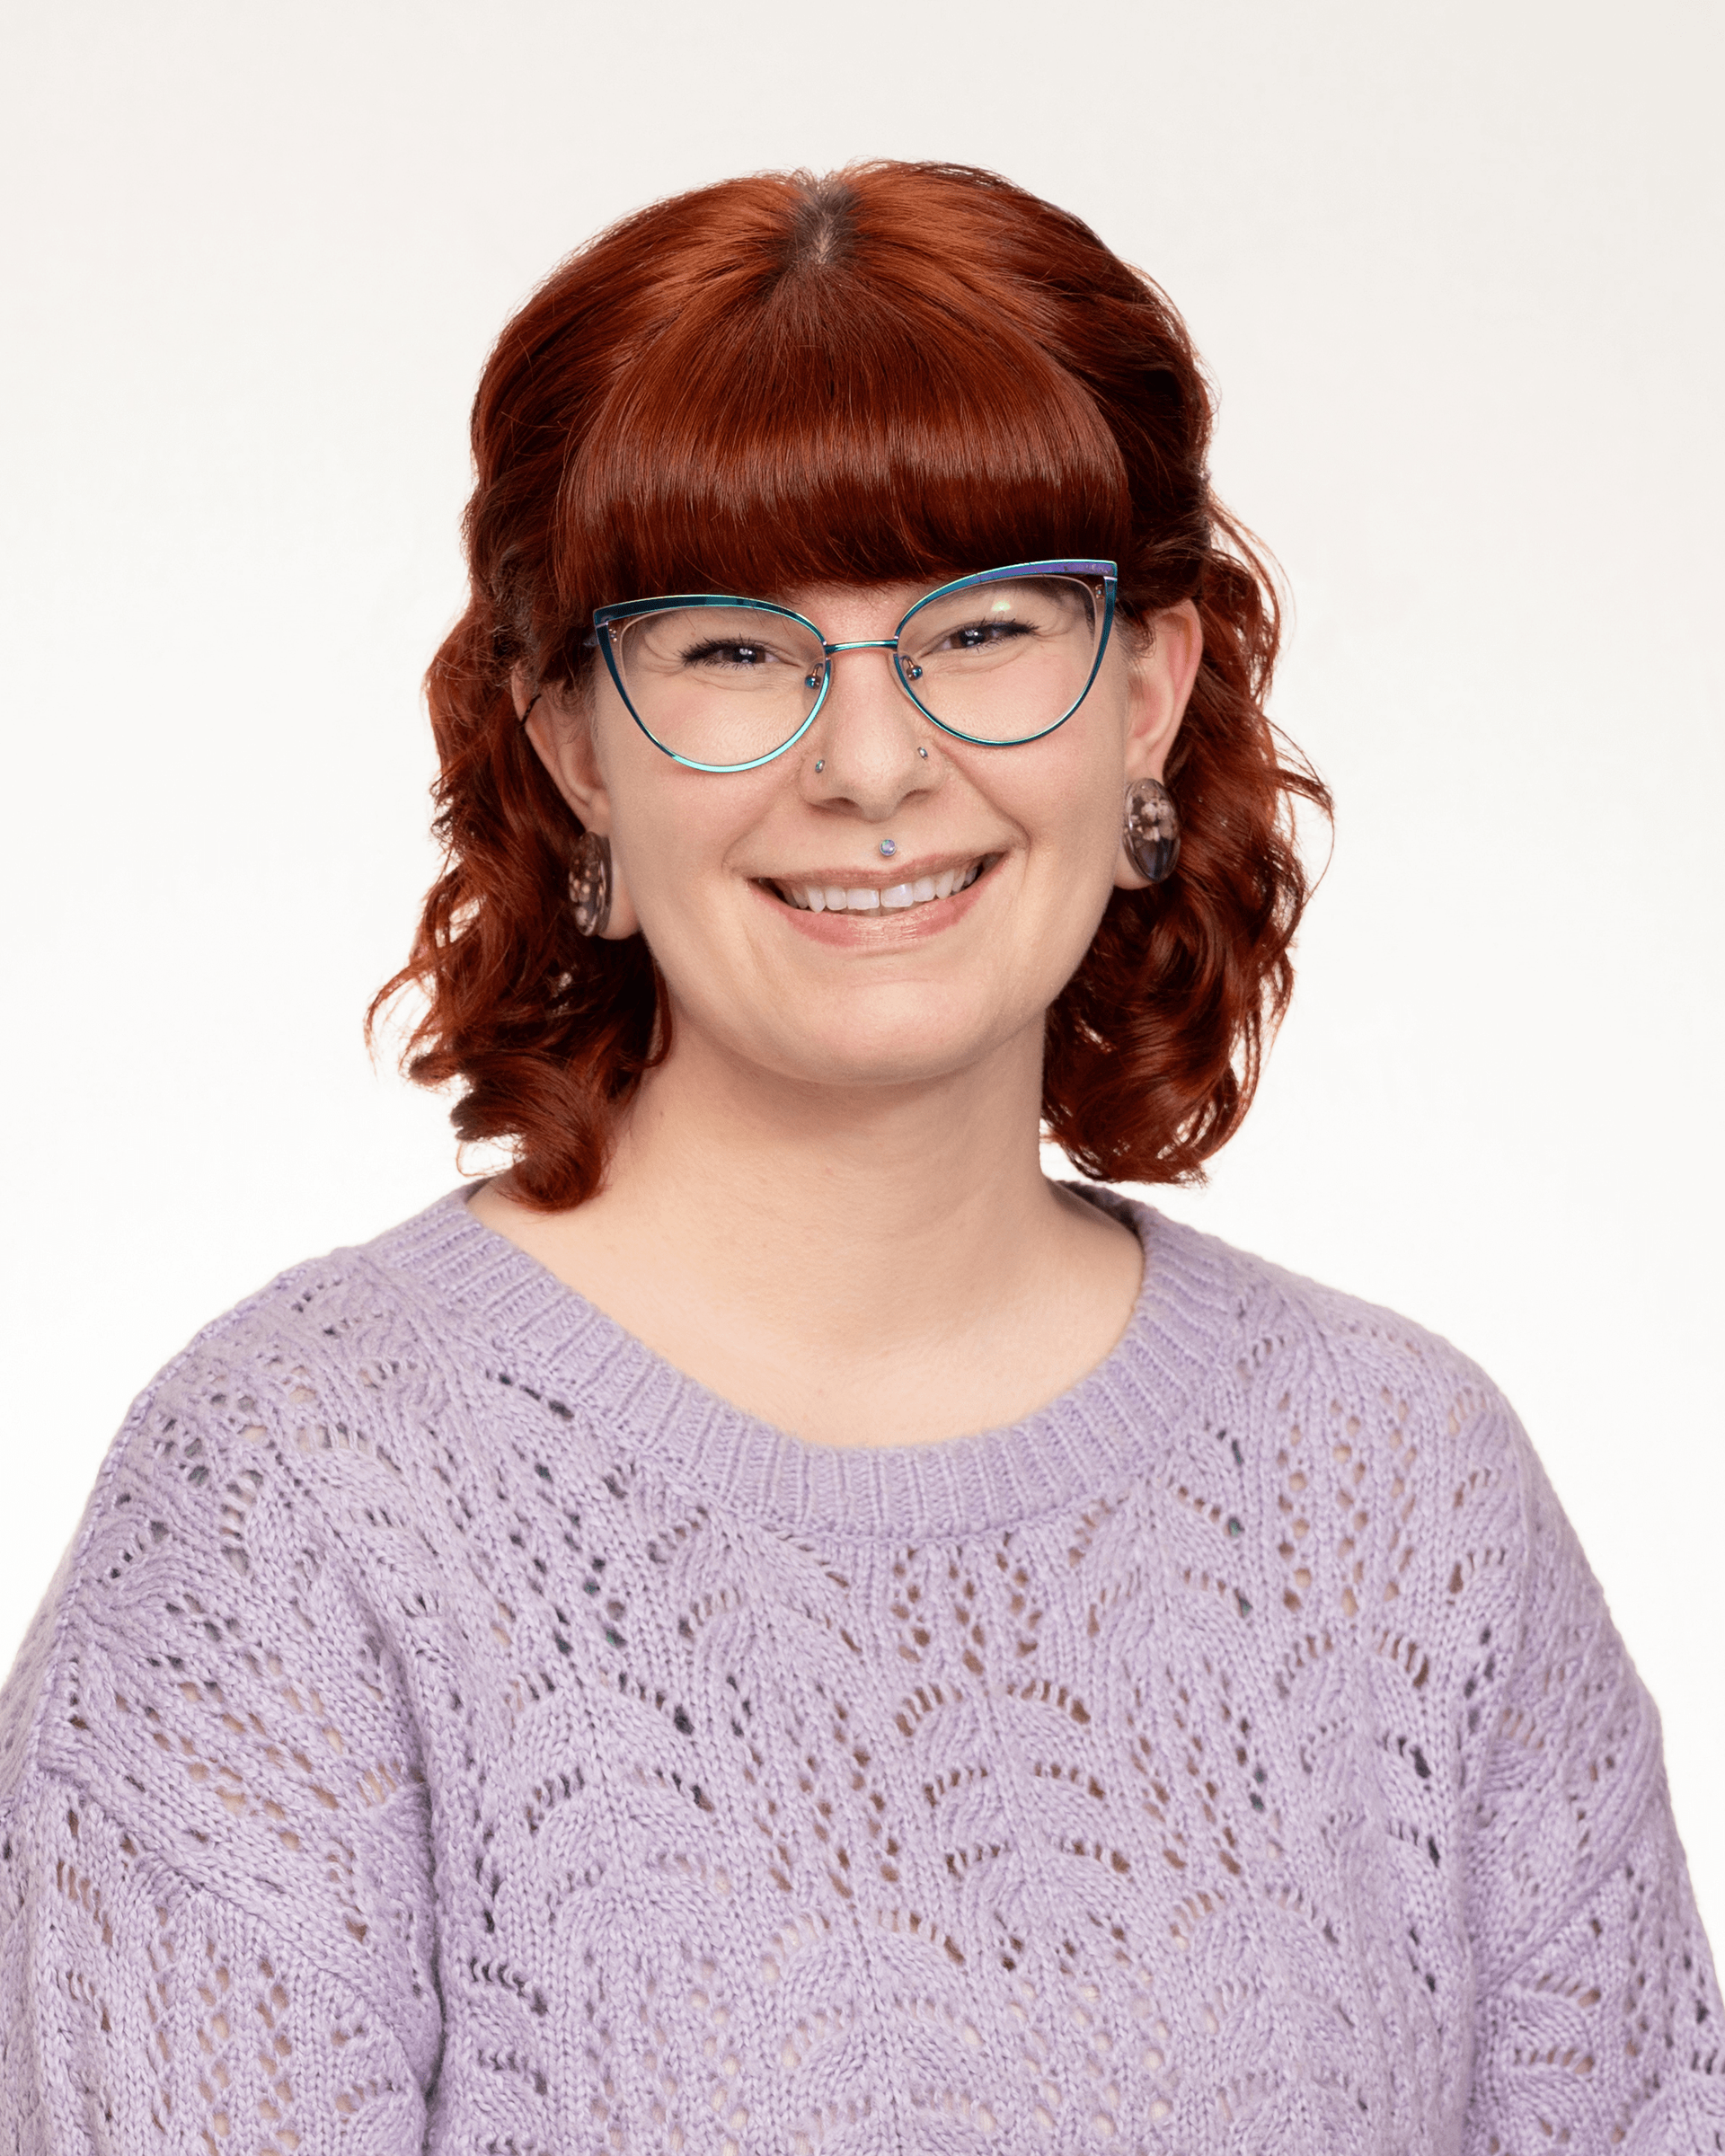 a woman with red hair and glasses is wearing a purple sweater .